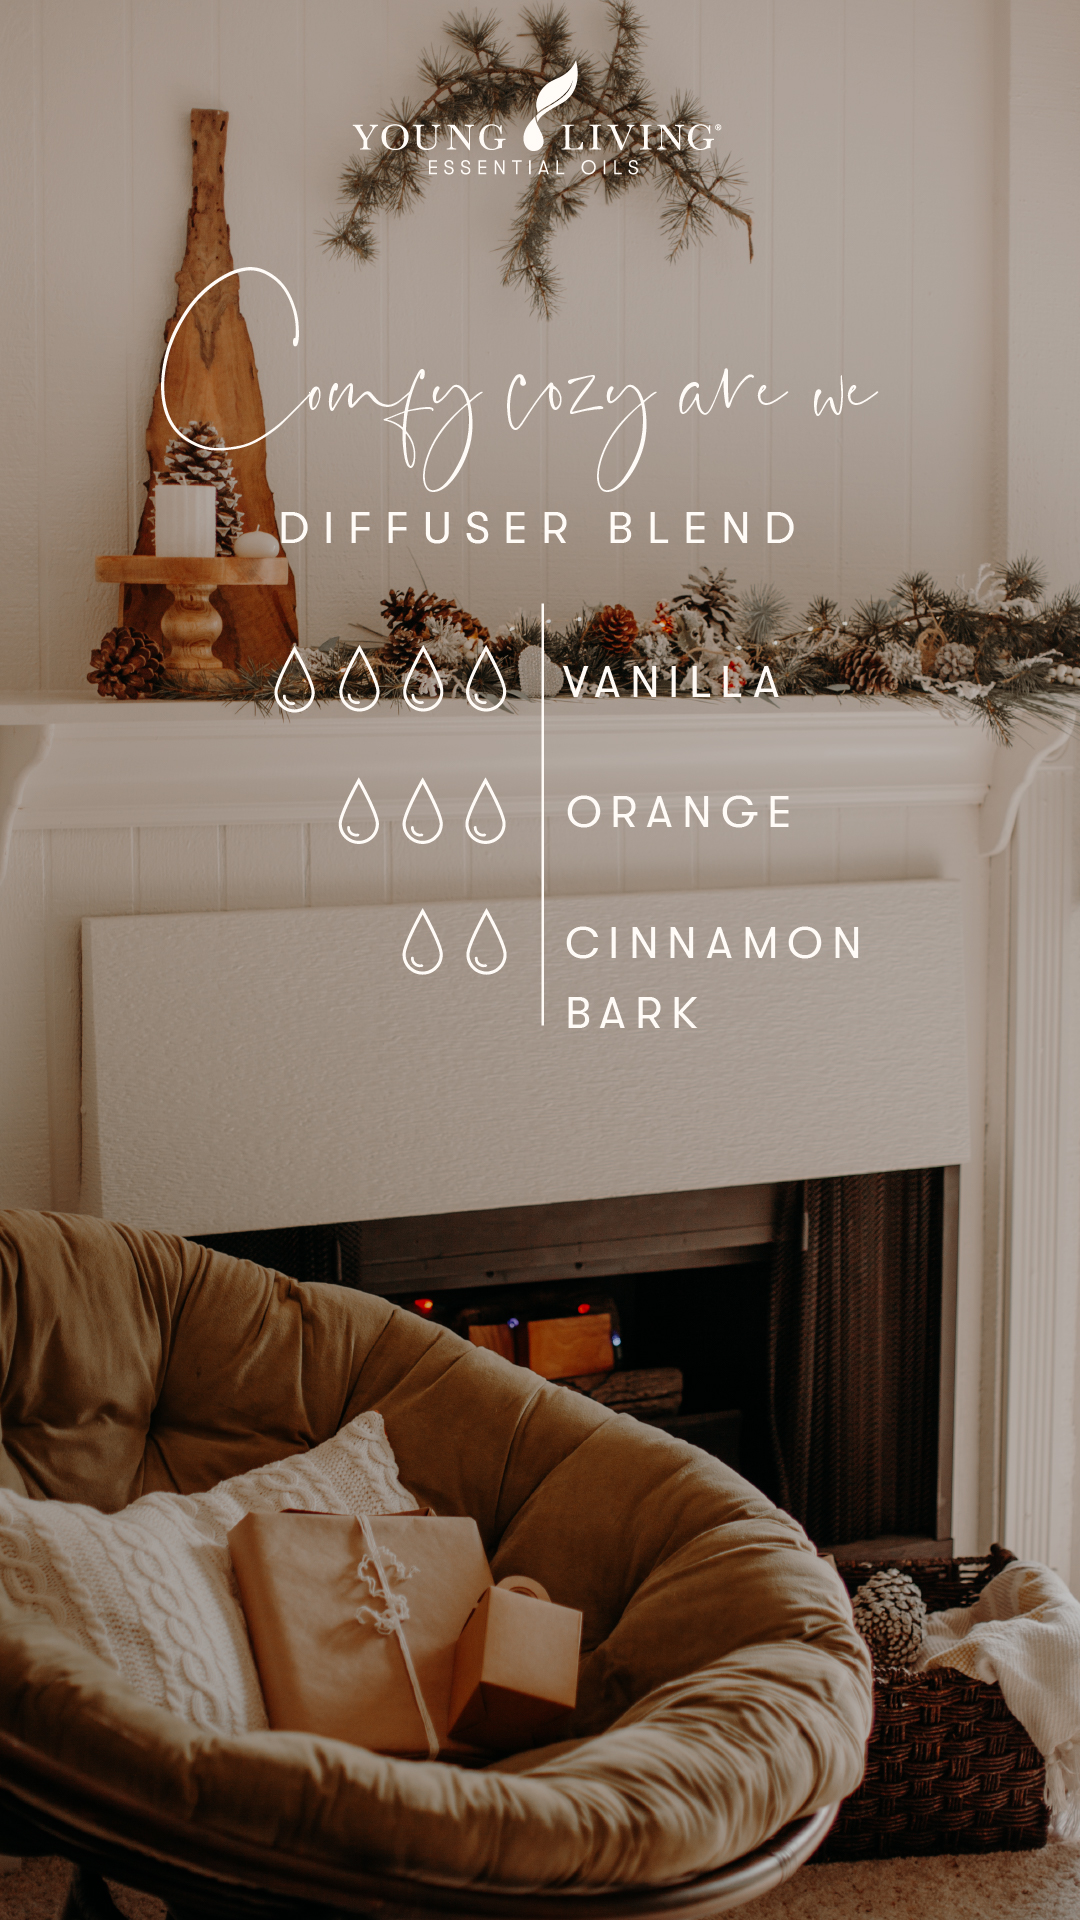 Young Living Holiday Diffuser Blend - comfy cozy are we